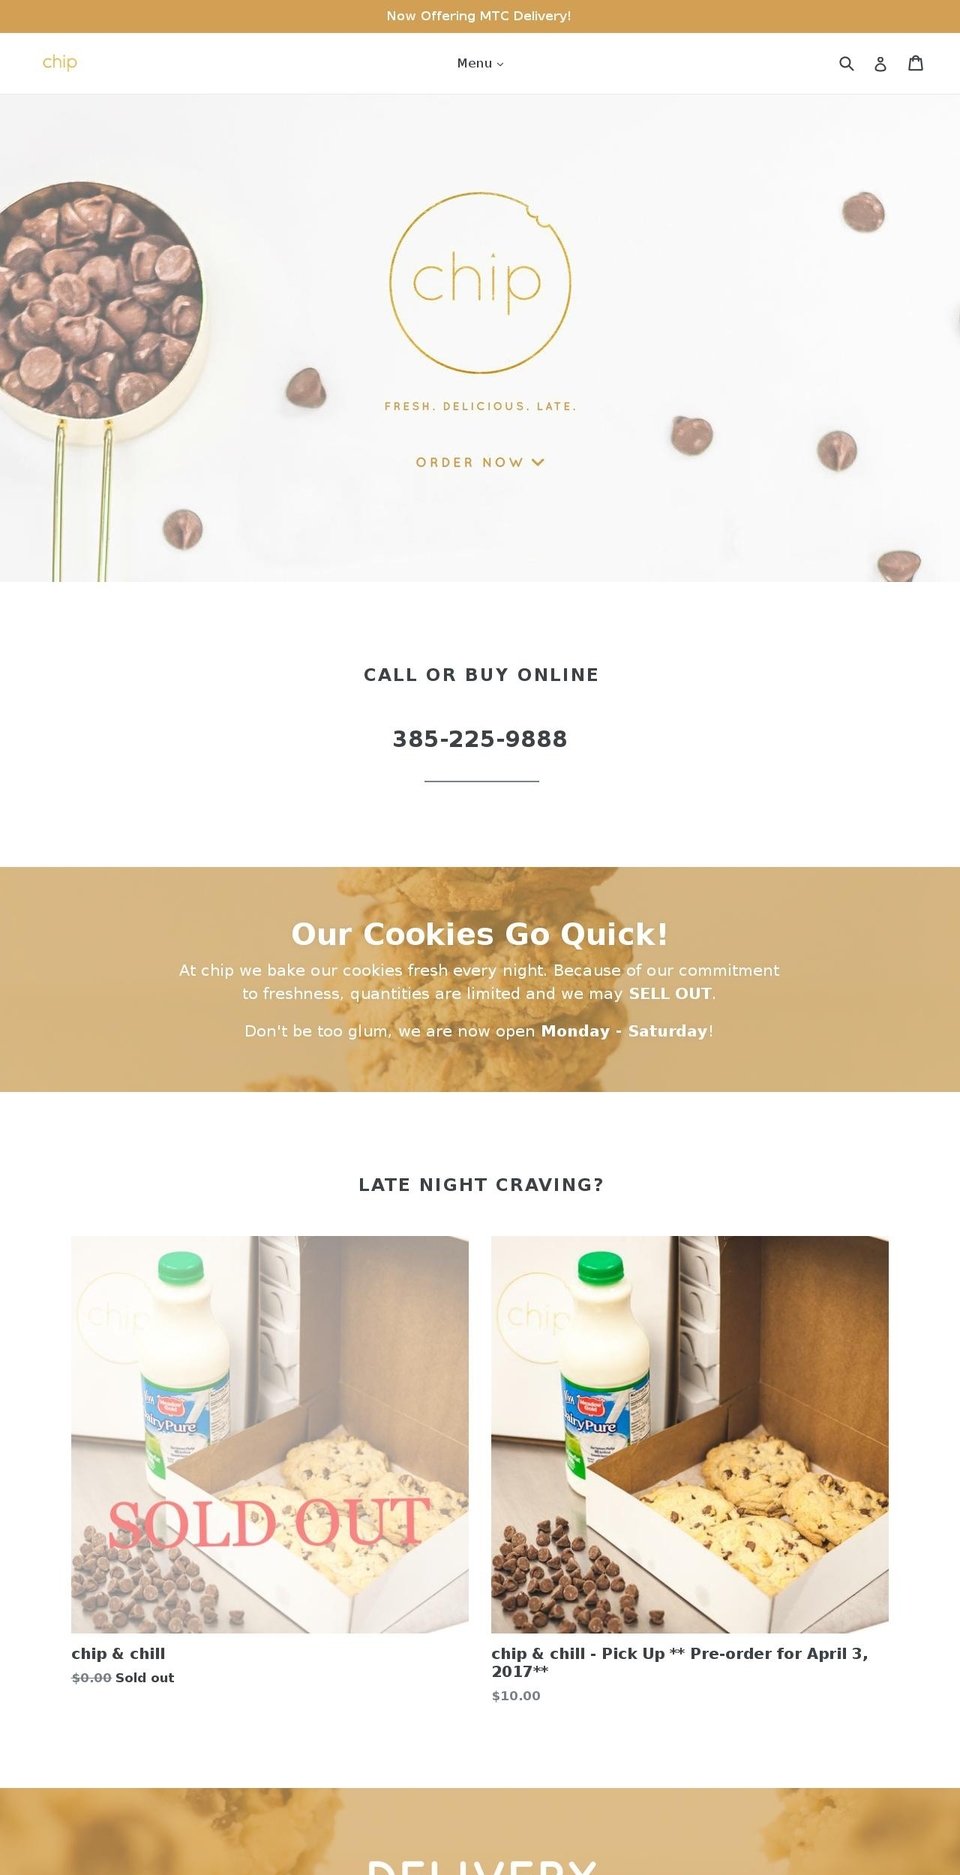 Palo Alto Shopify theme site example chipcookies.co